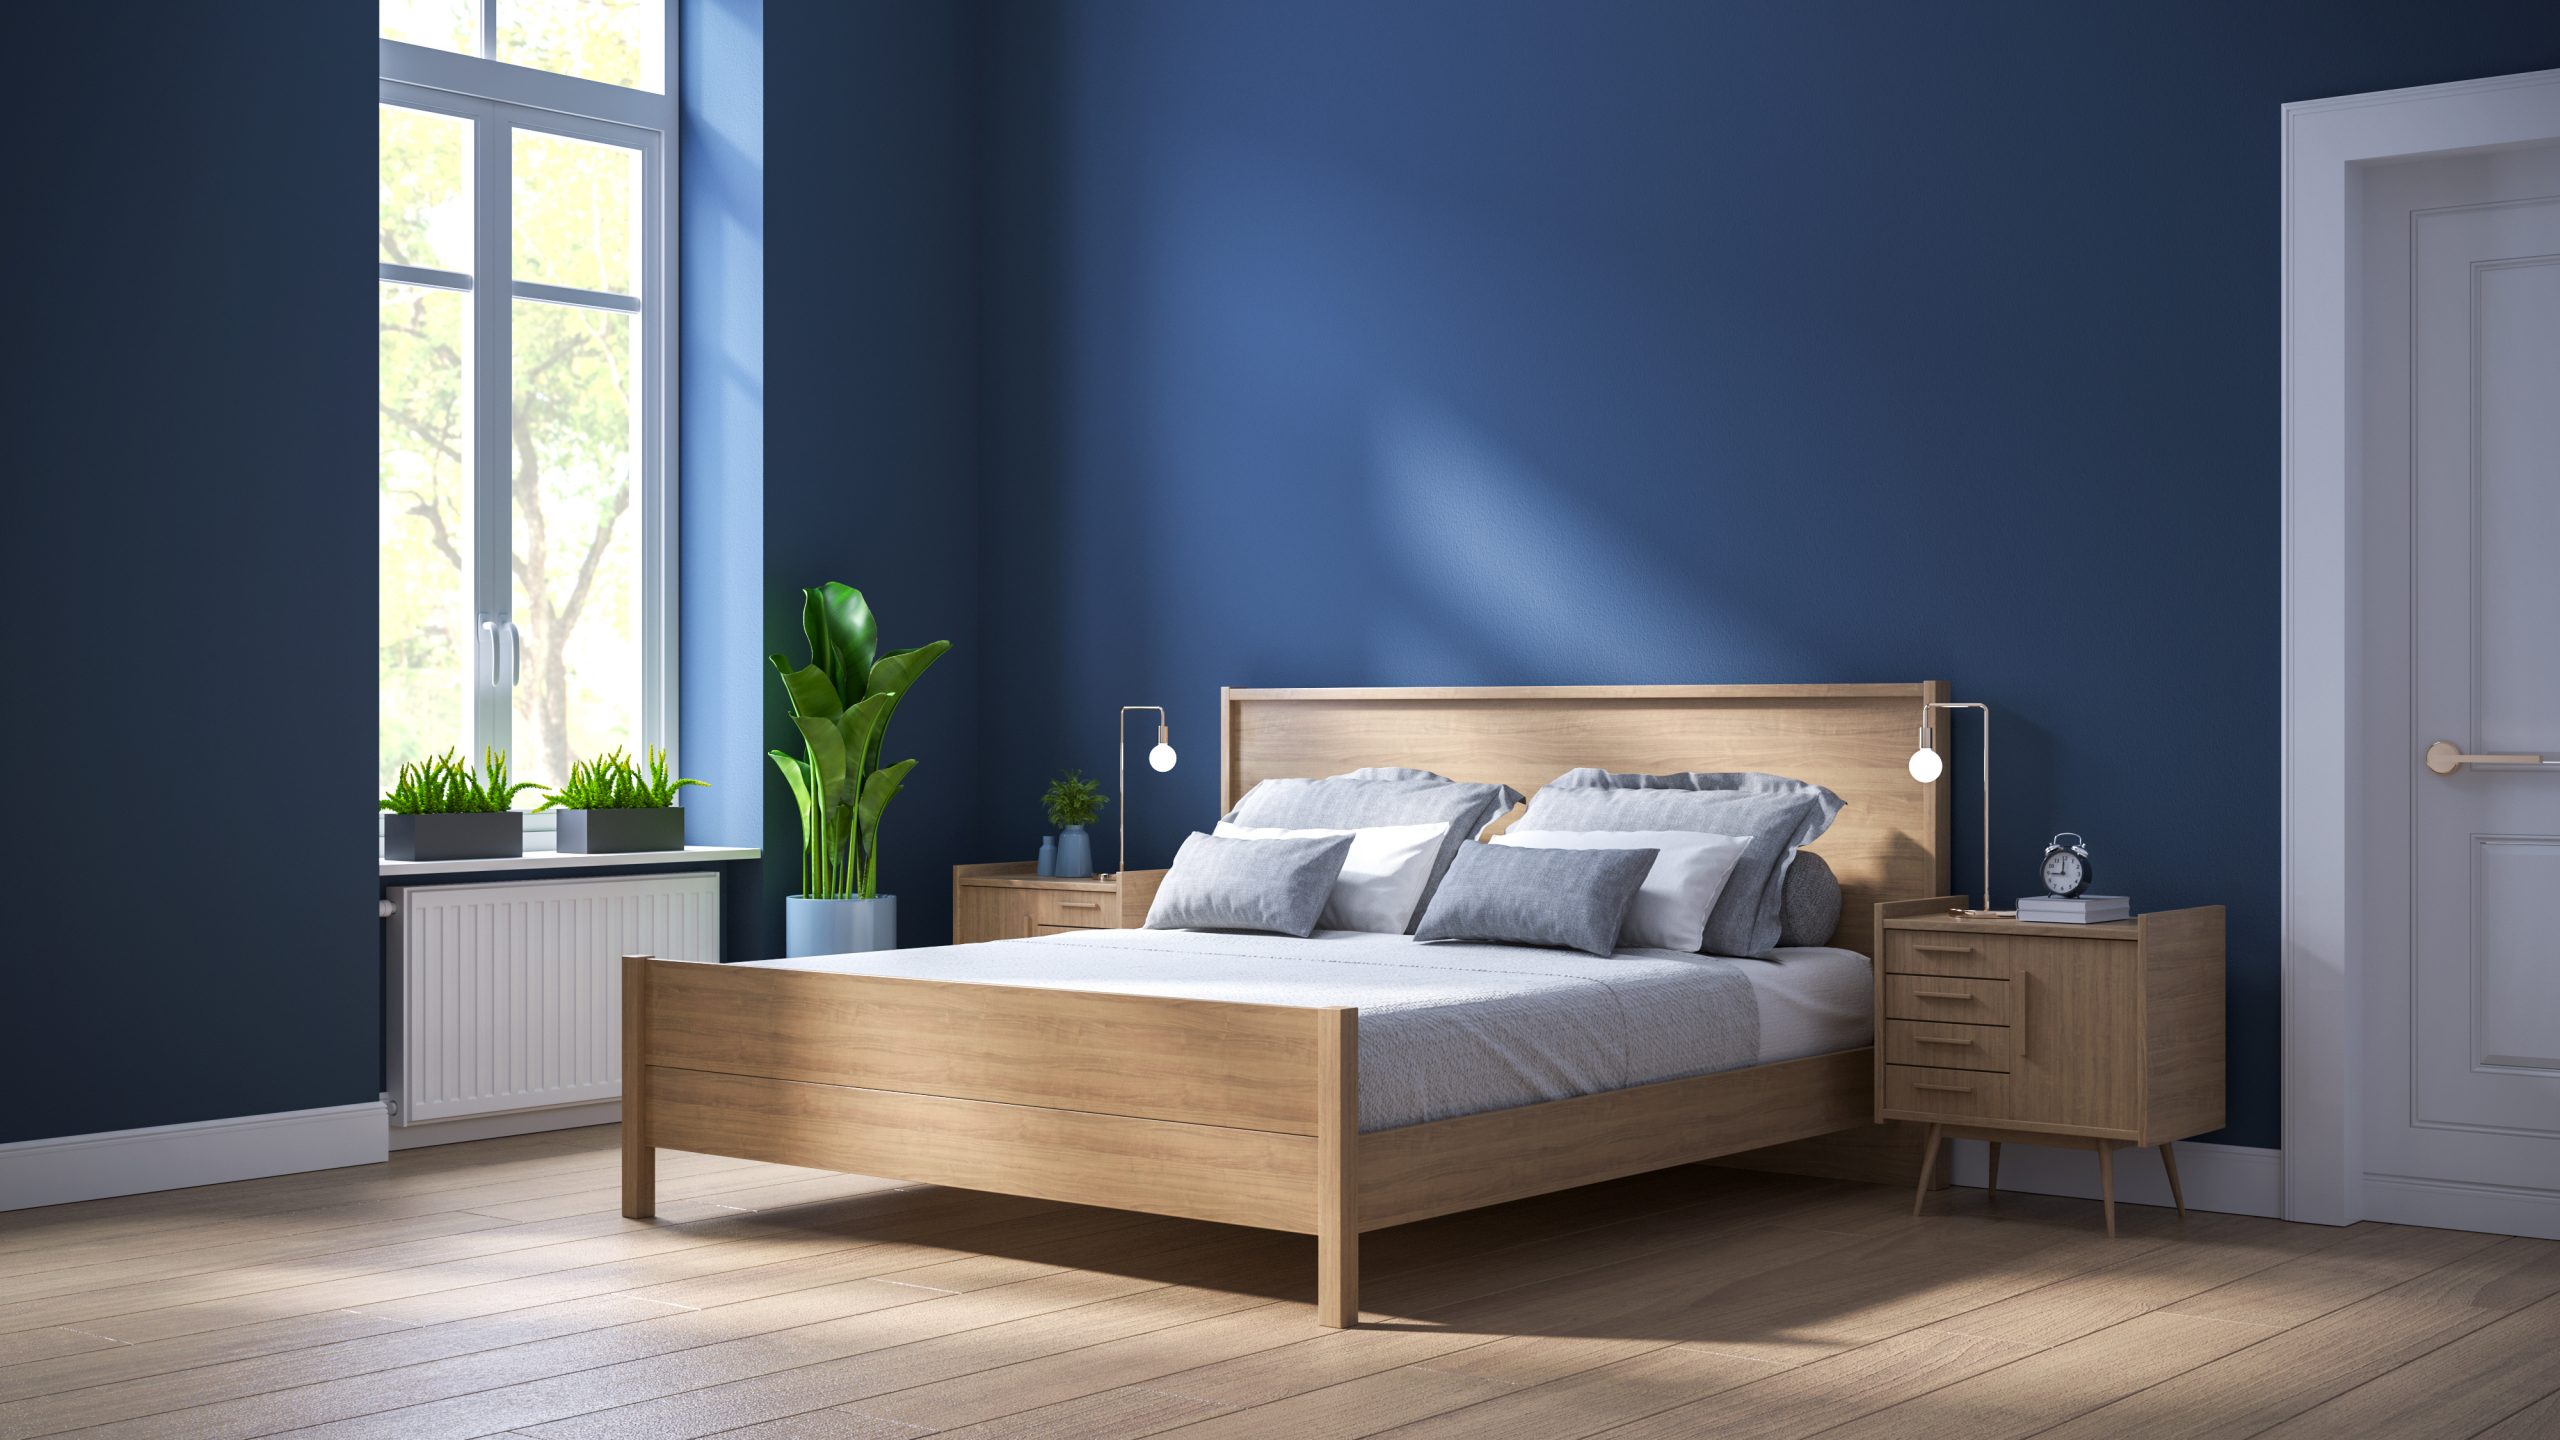 The Best Bedroom Colors of 2020 | thehome.com